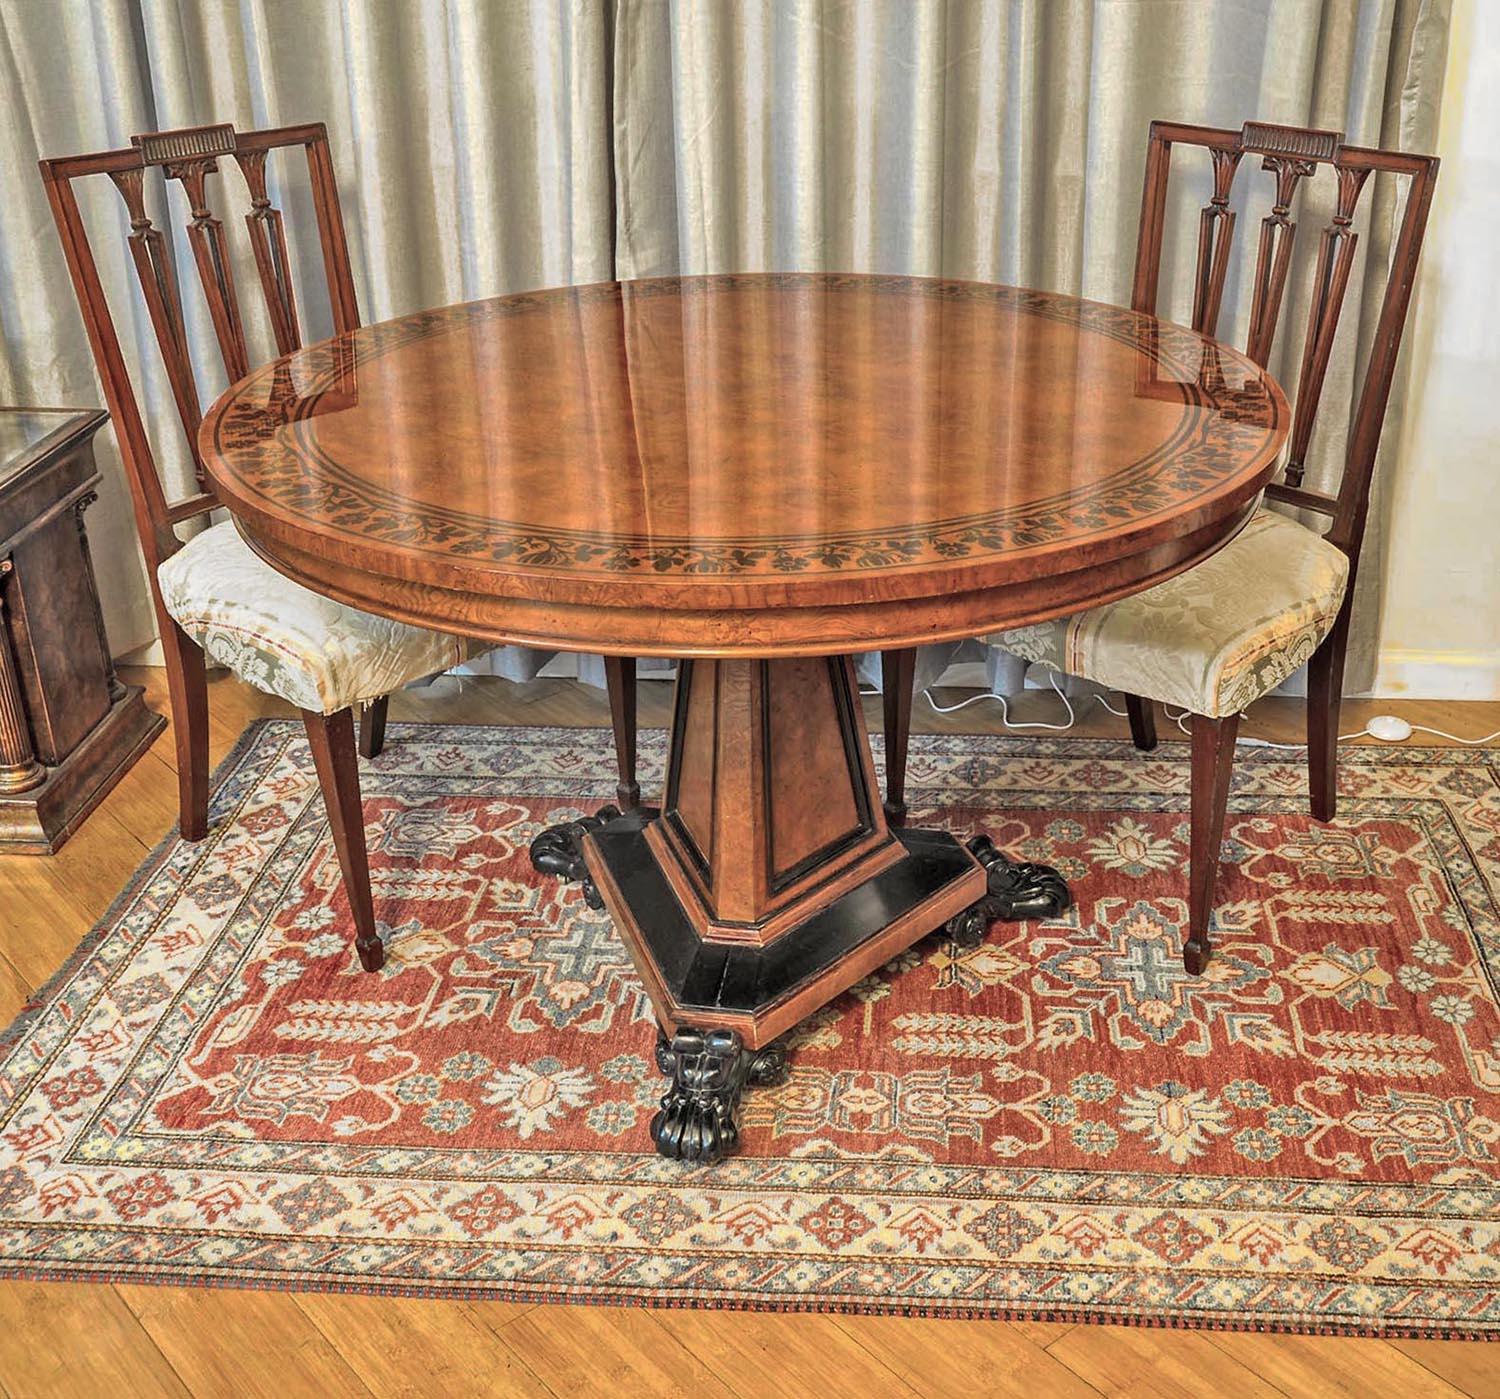 An outstanding Regency style center table.

from Baker Furniture’s exclusive,